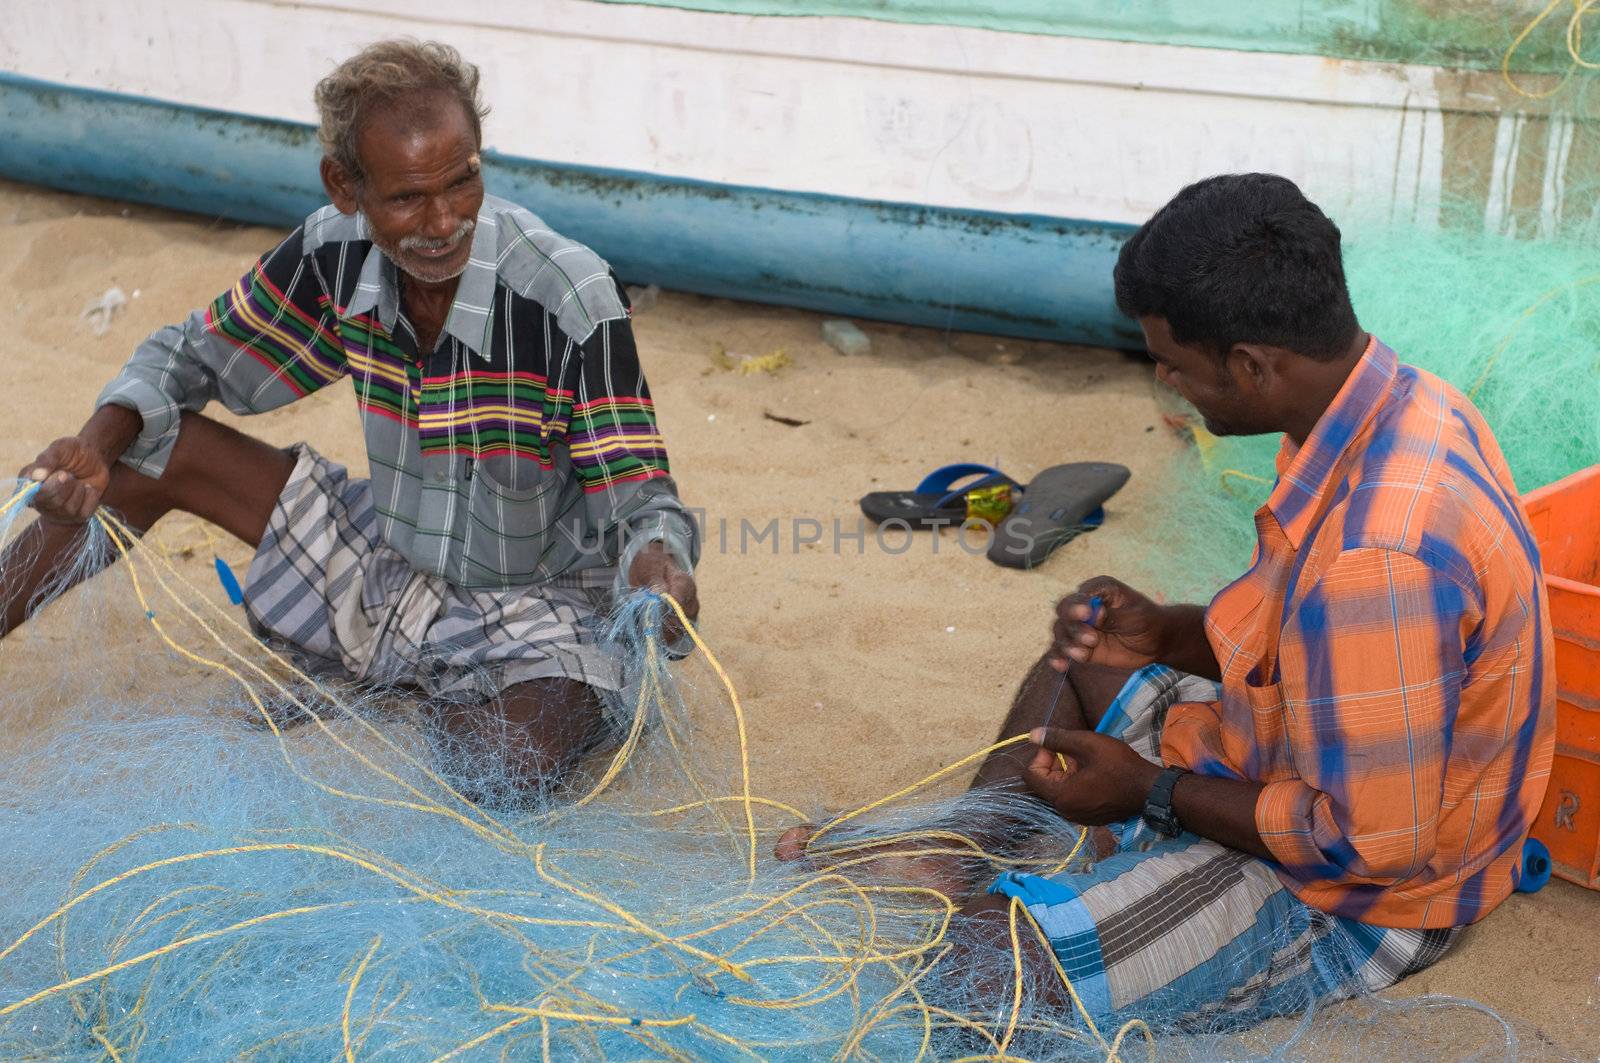 CHENNAI, INDIA - JUN 6: Fisherman weaving nets in the Indian coastline and getting ready to ctch fish for the holidays on June 6, 2009 in Chennai, India